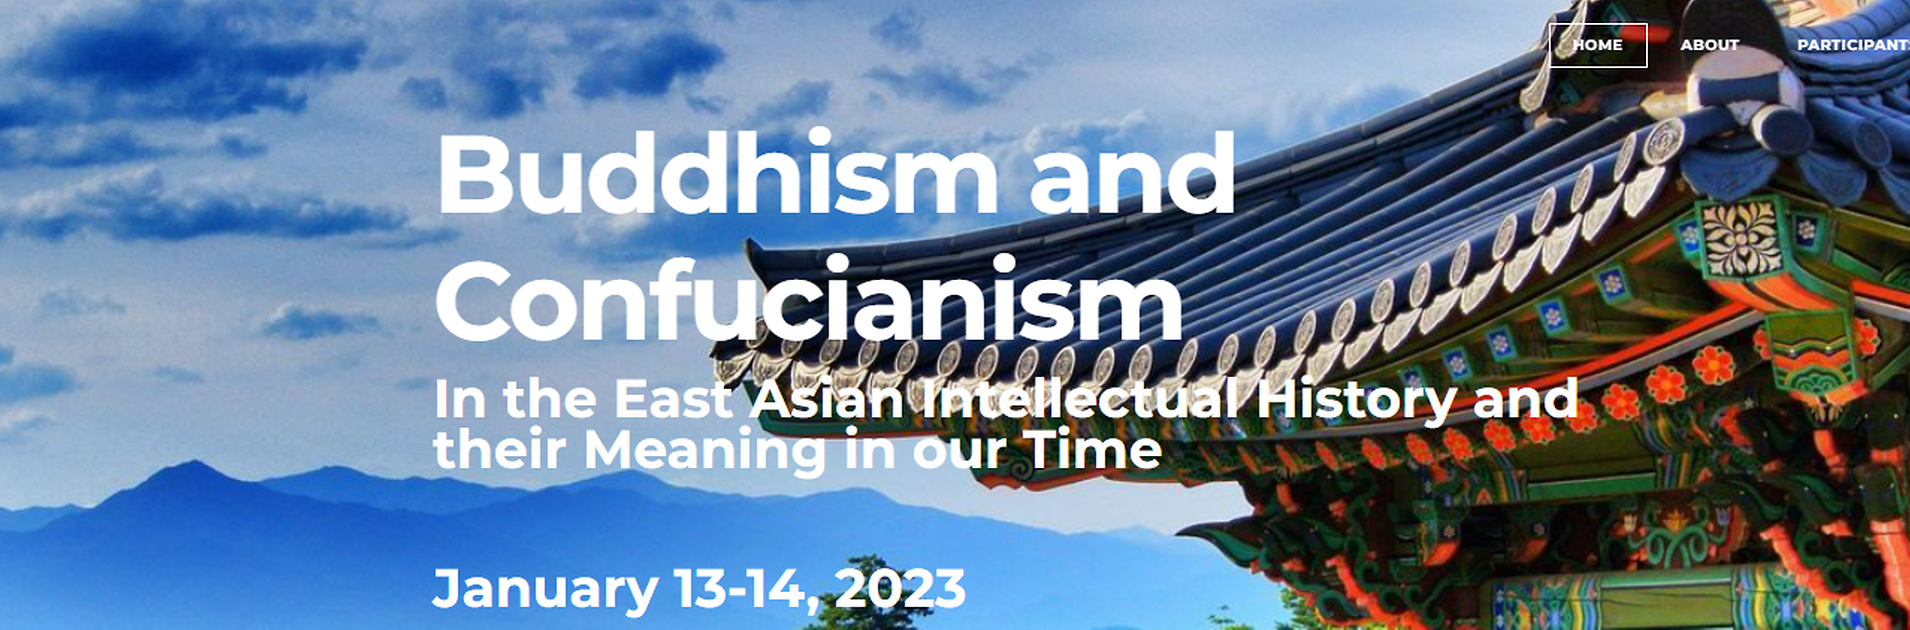 Buddhism and Confucianism